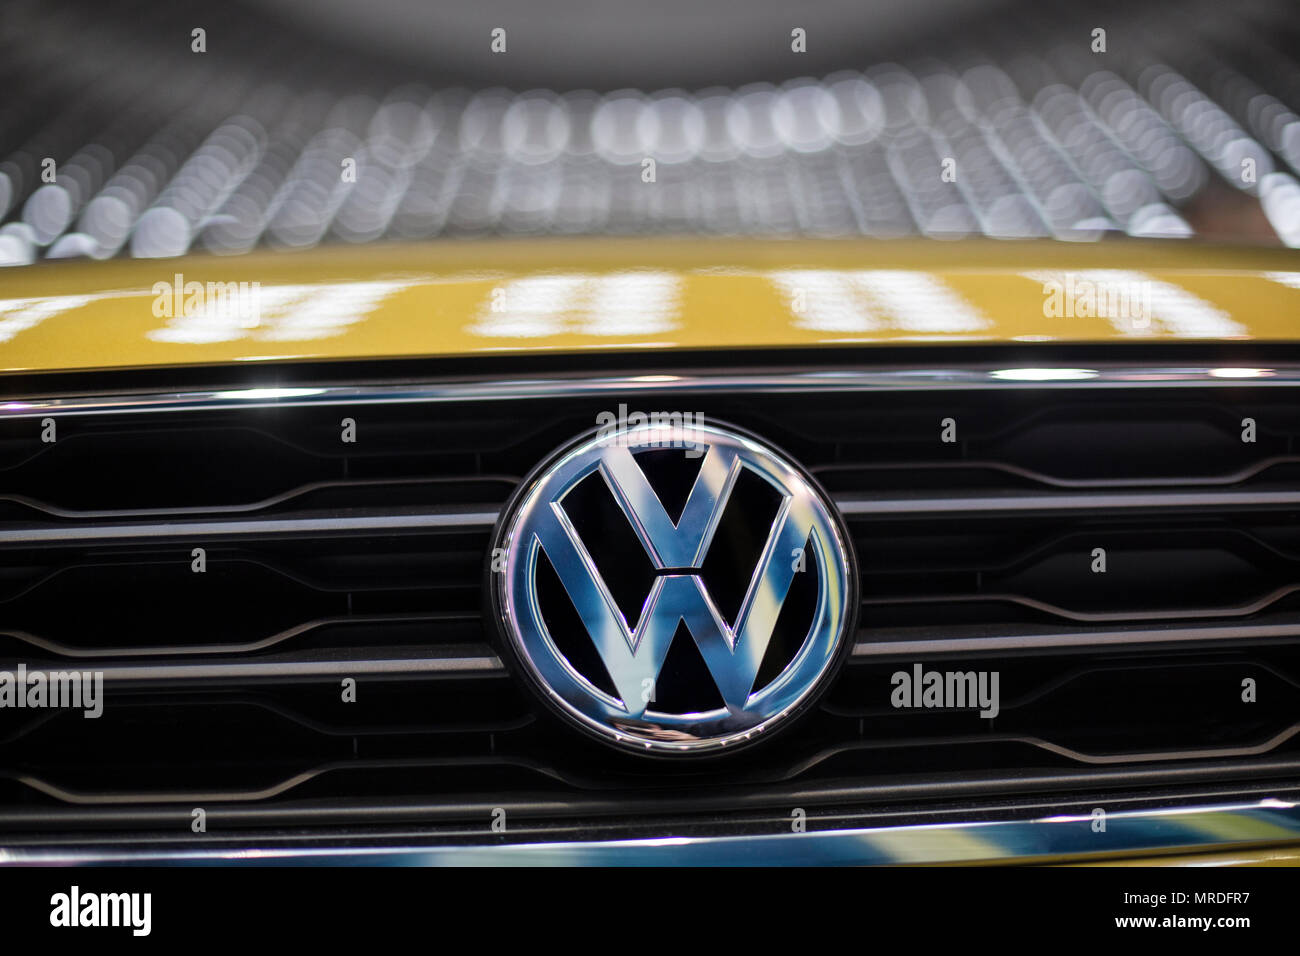 Volkswagen sign on a car Stock Photo